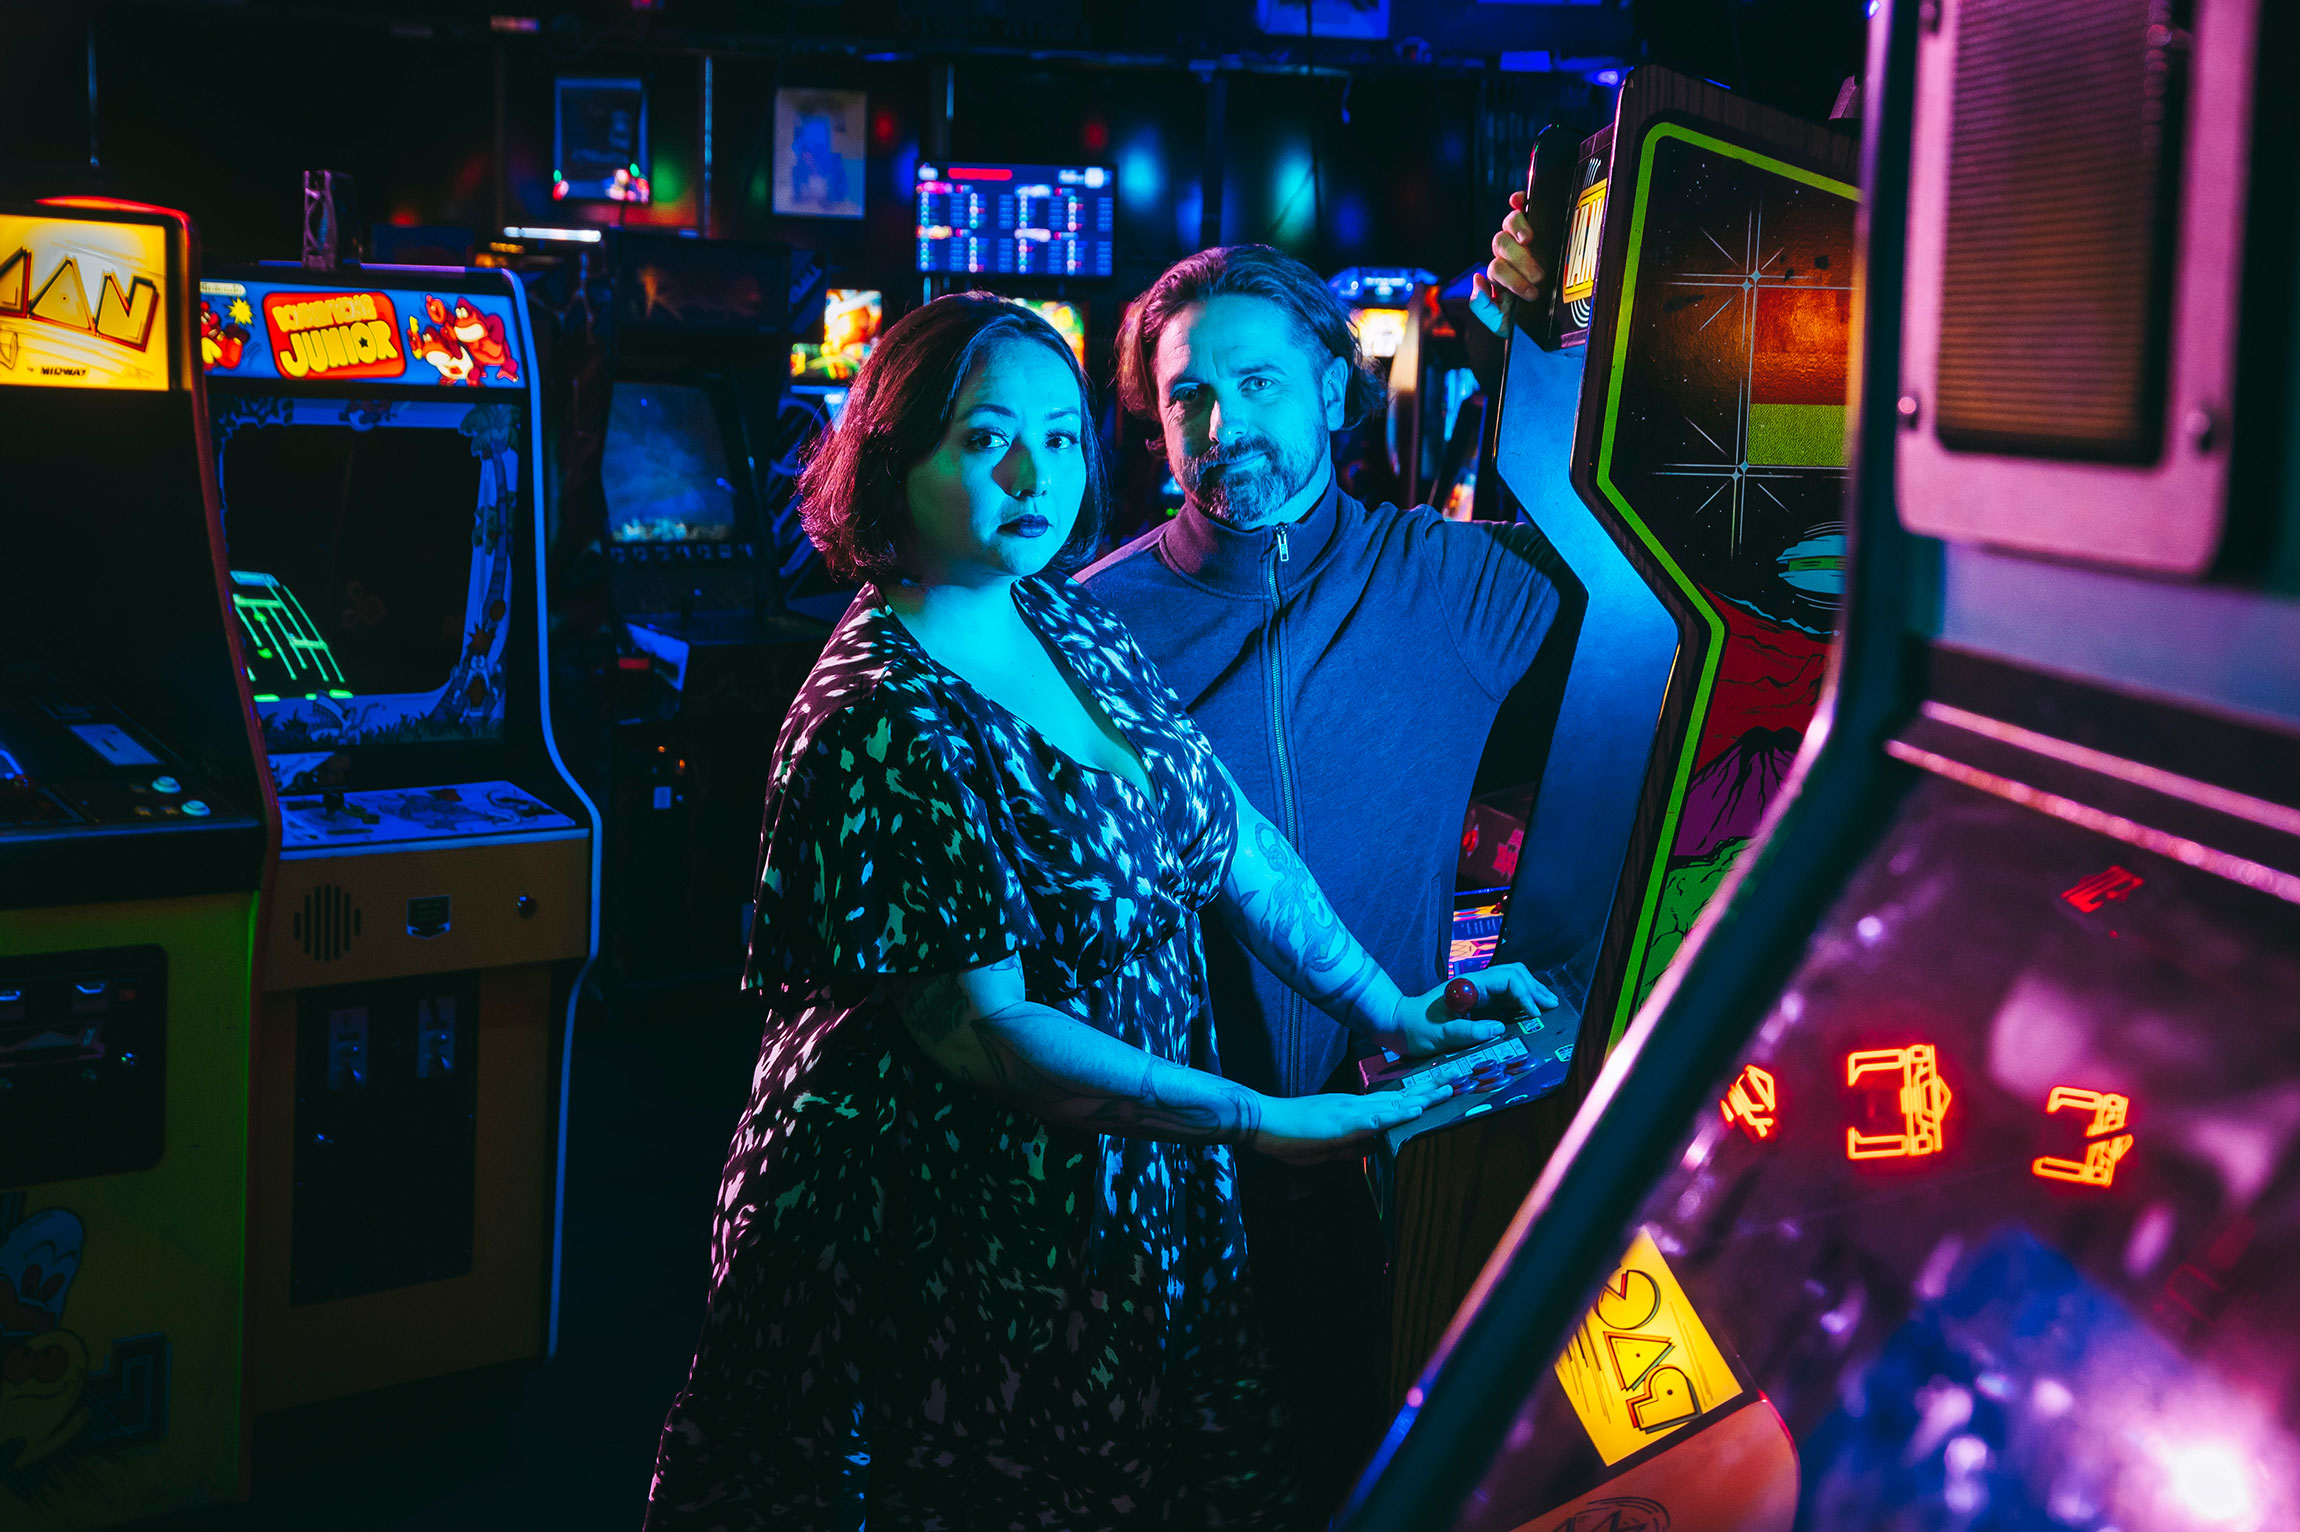 Player 1 Video Game Bar pairs all-you-can-play machines with craft beer -  Las Vegas Weekly